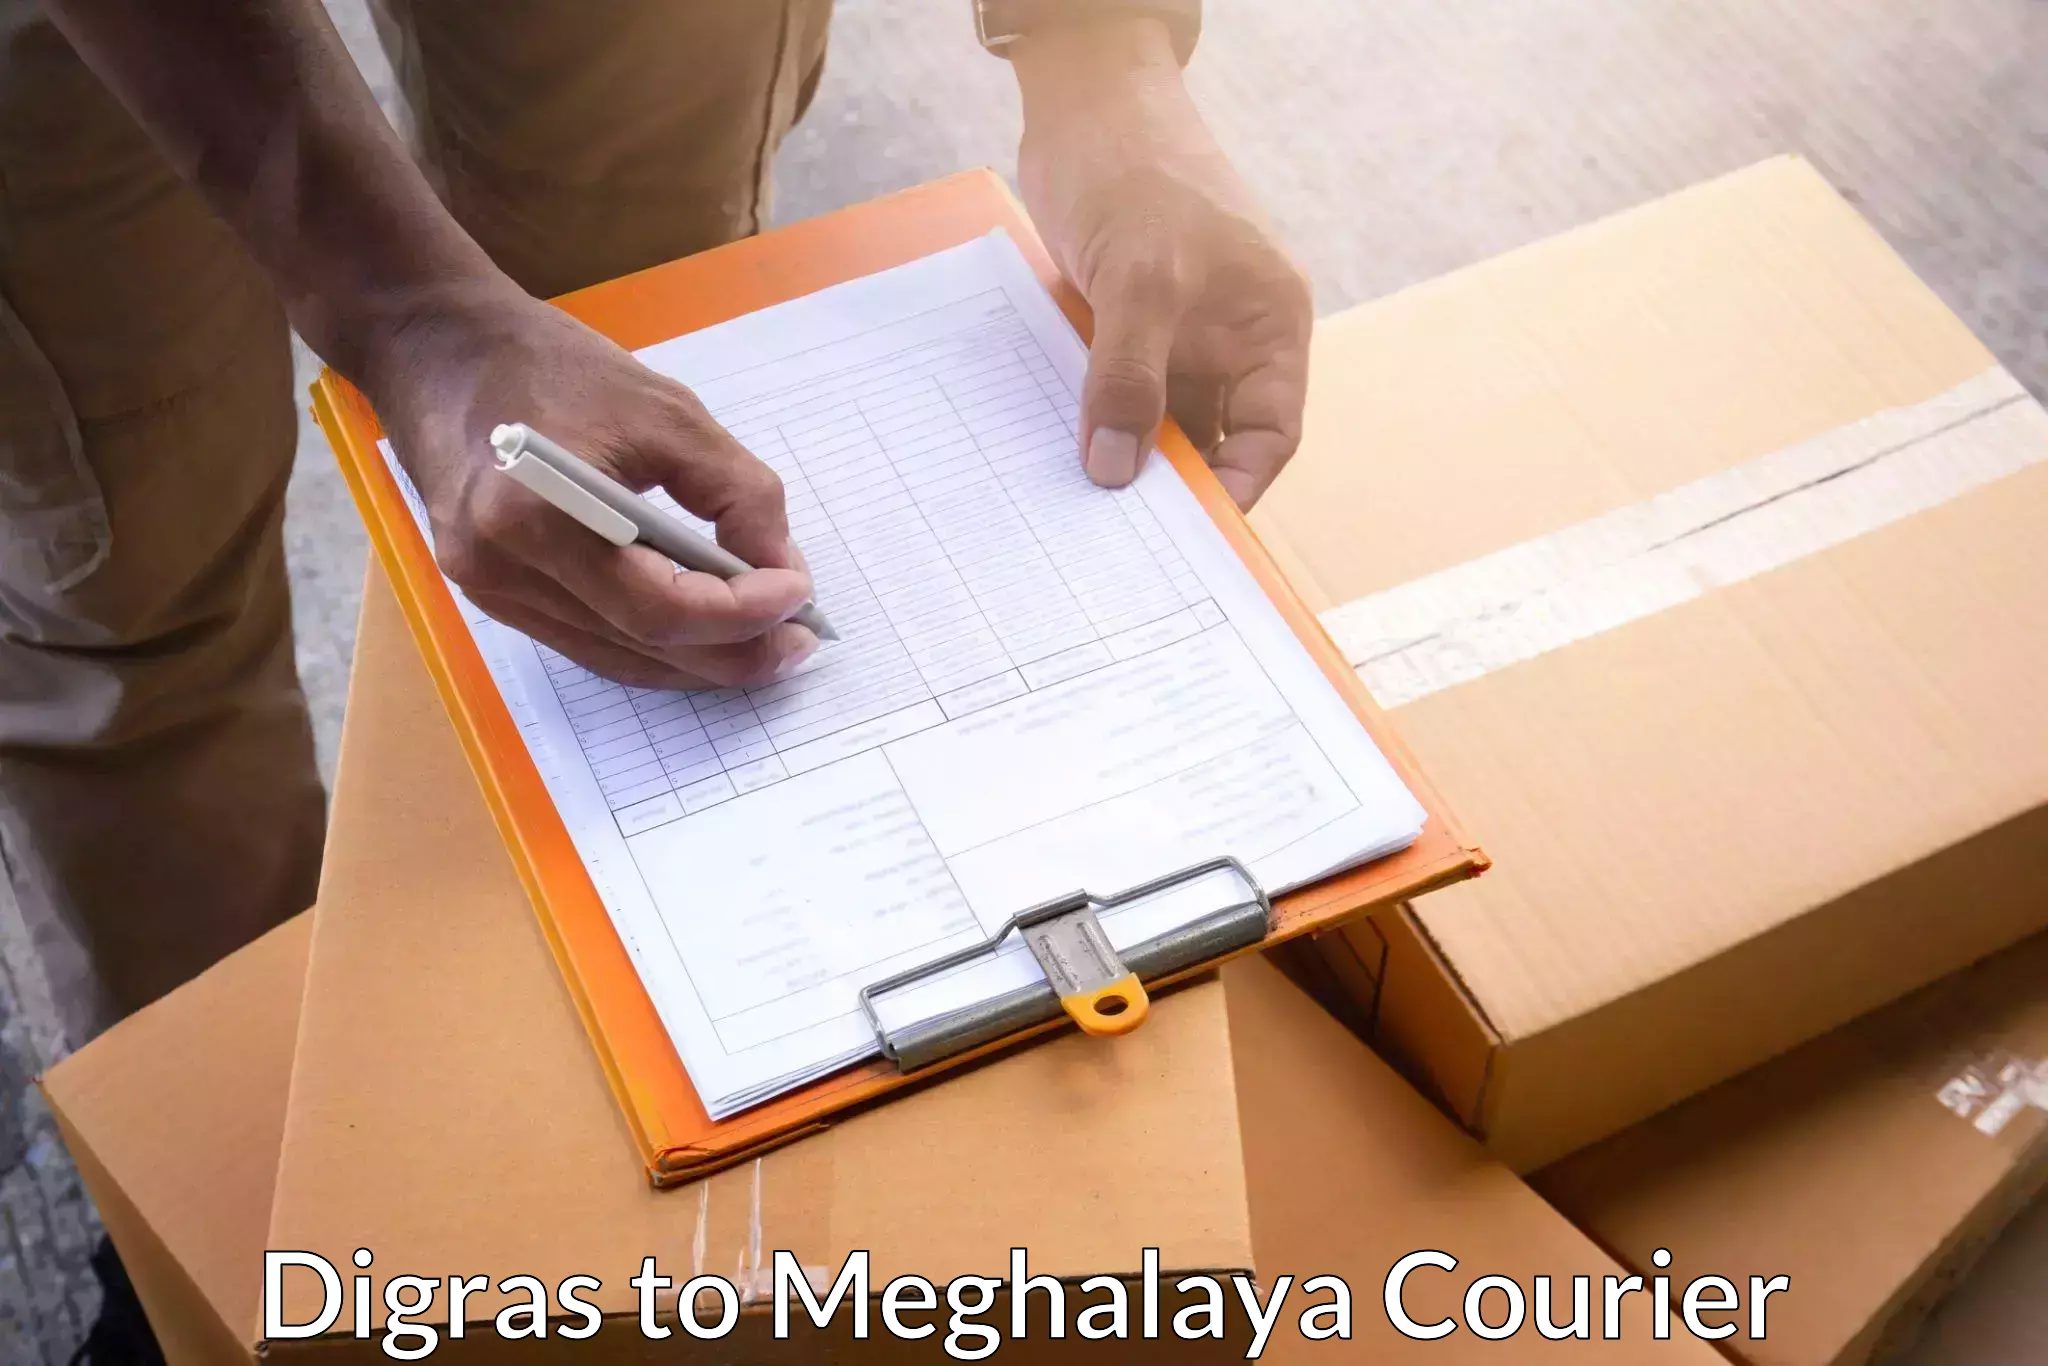 Professional courier handling Digras to Tura